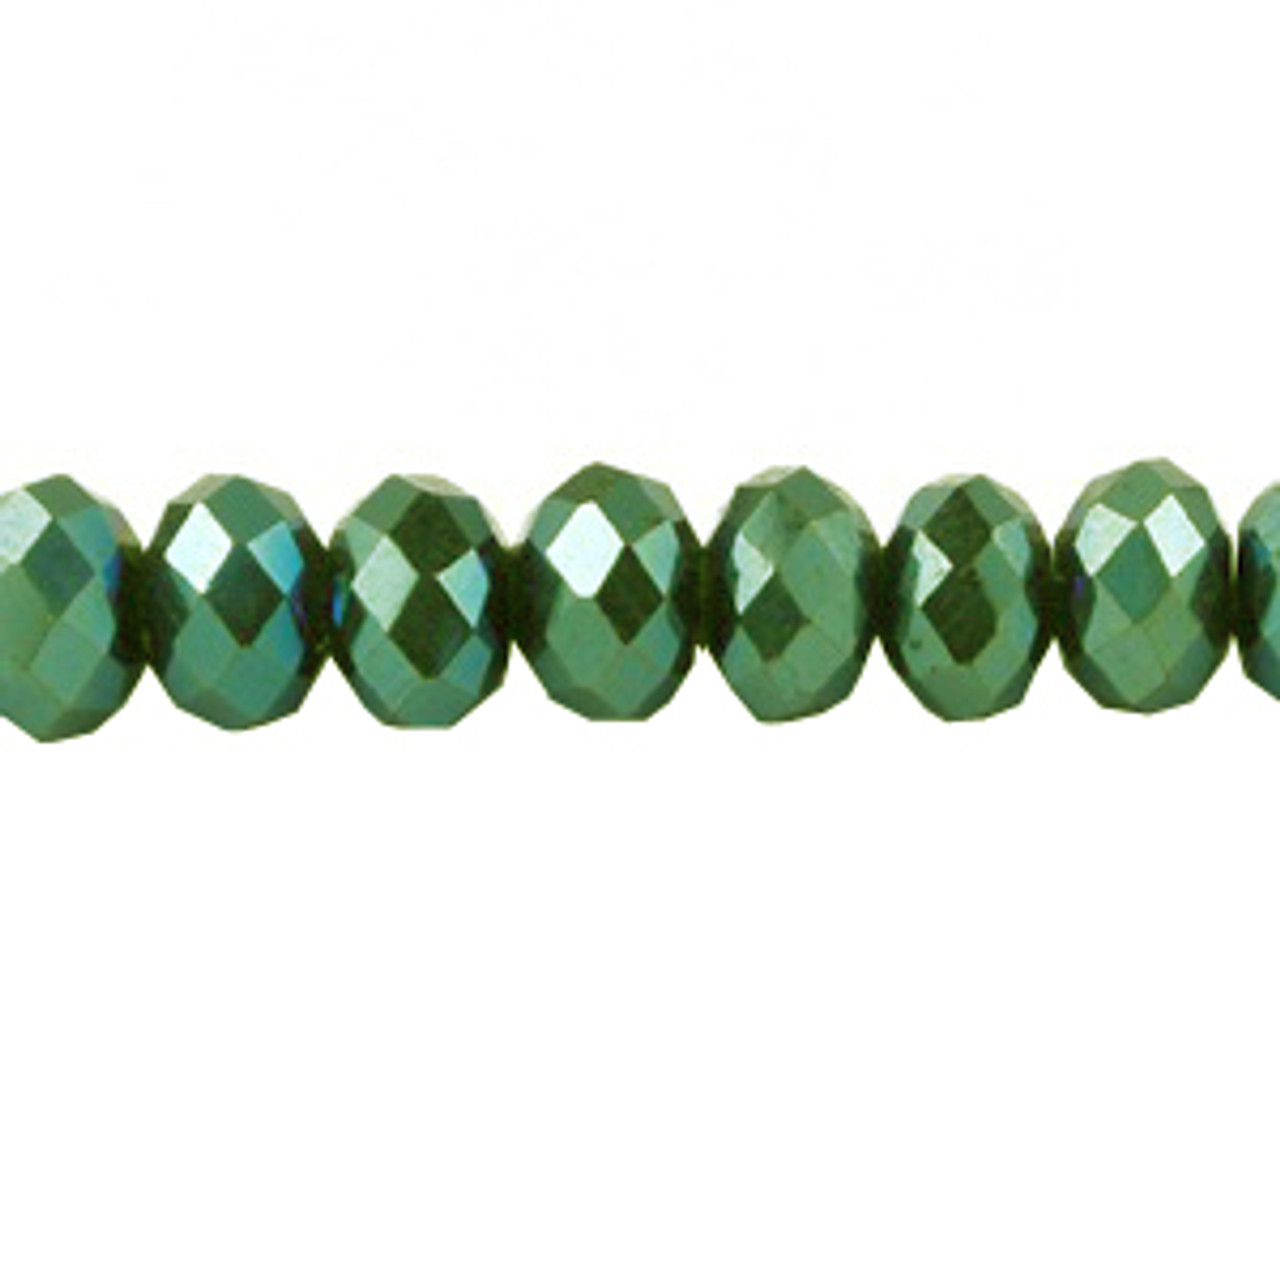 4x3mm Green Light Faceted Roundel (115-118 Beads) #41